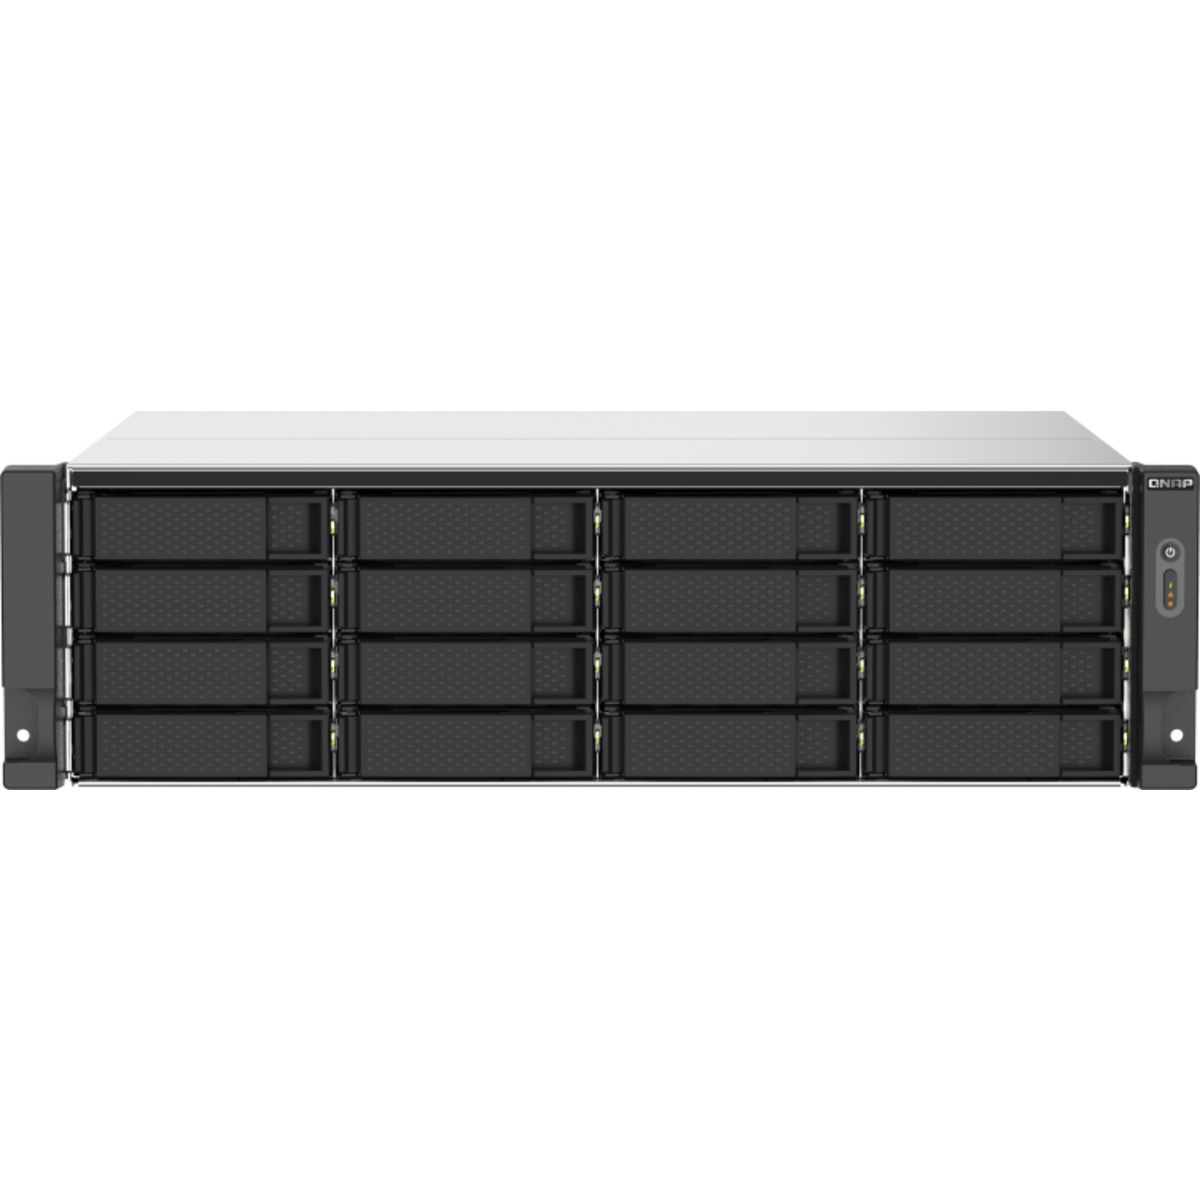 QNAP TS-1673AU-RP 252tb 16-Bay RackMount Multimedia / Power User / Business NAS - Network Attached Storage Device 14x18tb Western Digital Ultrastar DC HC550 WUH721818ALE6L4 3.5 7200rpm SATA 6Gb/s HDD ENTERPRISE Class Drives Installed - Burn-In Tested - FREE RAM UPGRADE TS-1673AU-RP